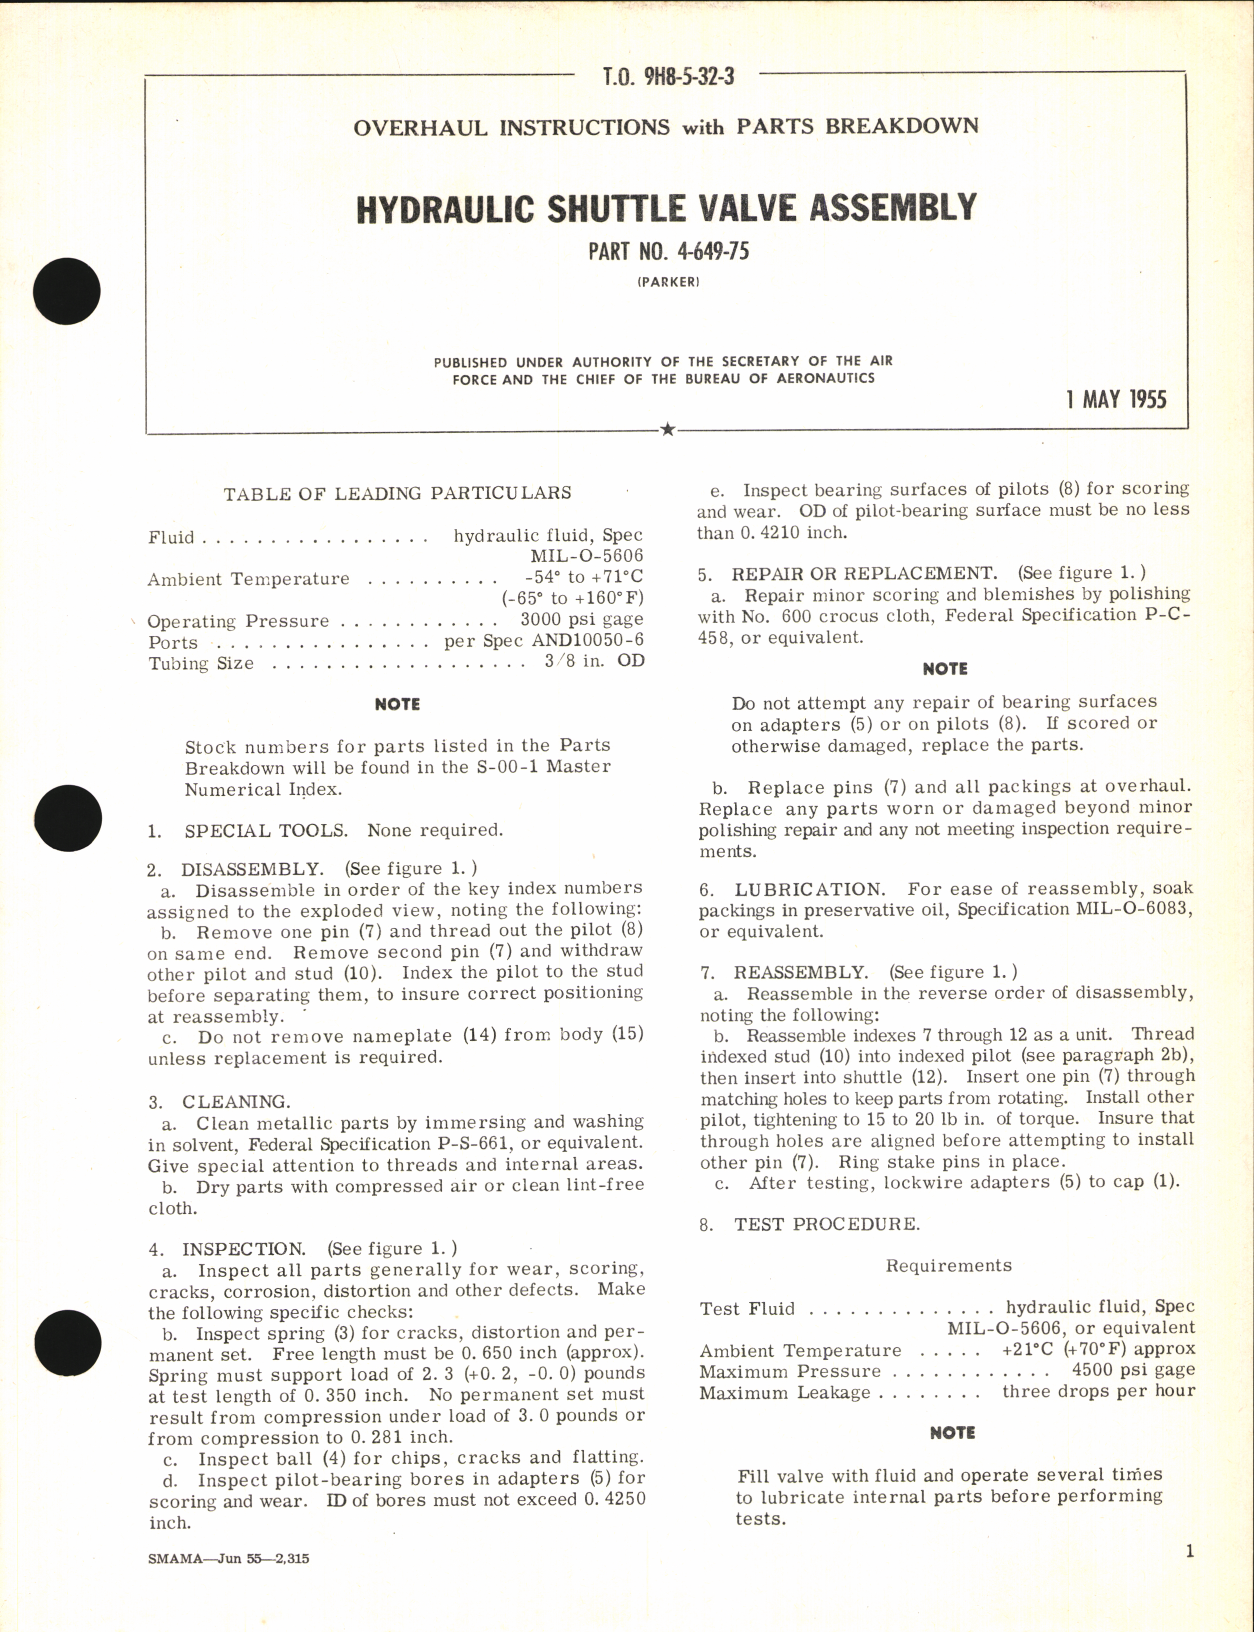 Sample page 1 from AirCorps Library document: Overhaul Instructions with Parts Breakdown for Hydraulic Shuttle Valve Assembly Part No. 4-649-75